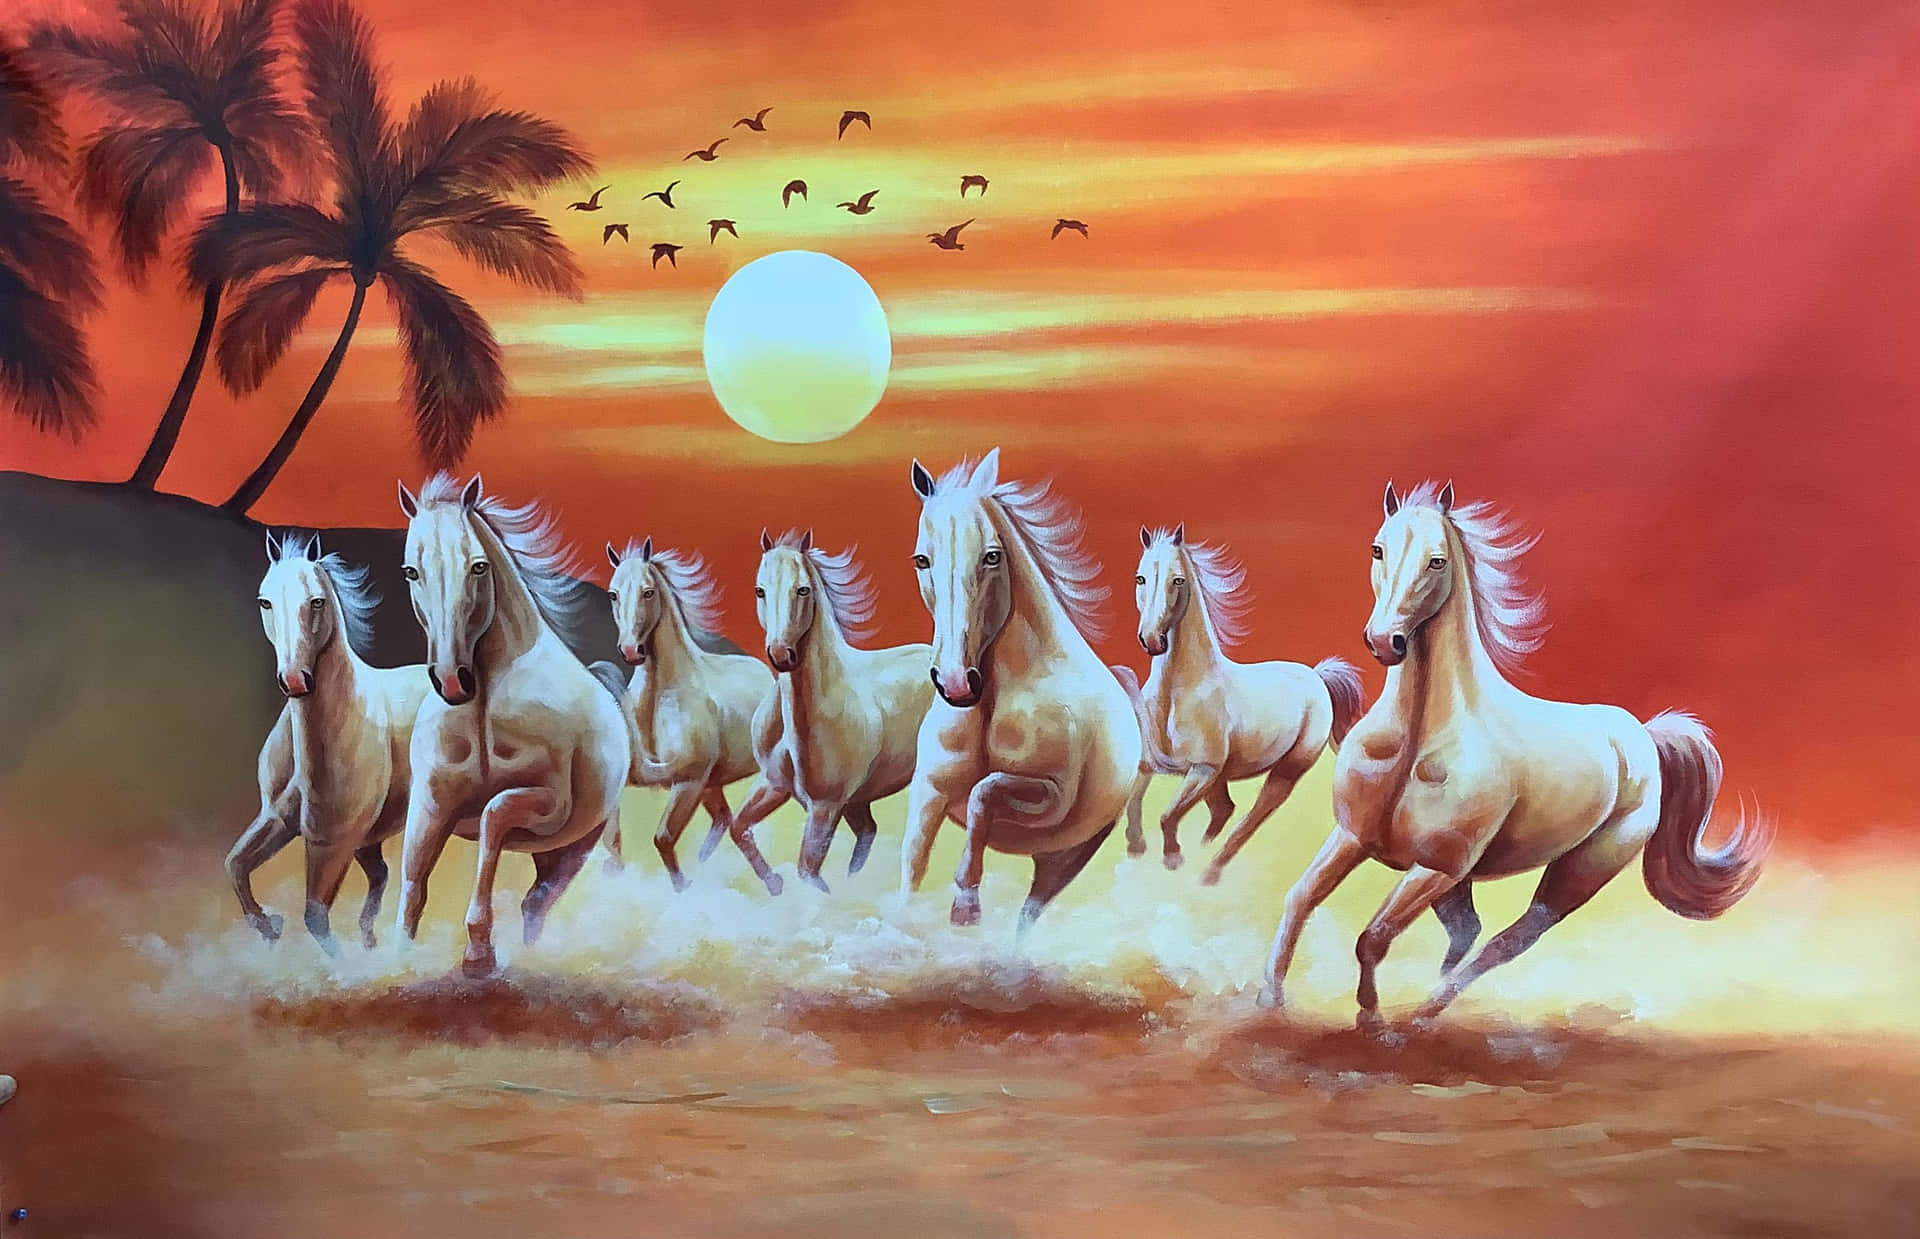 Download 7 White Horses Through The Sand Wallpaper 